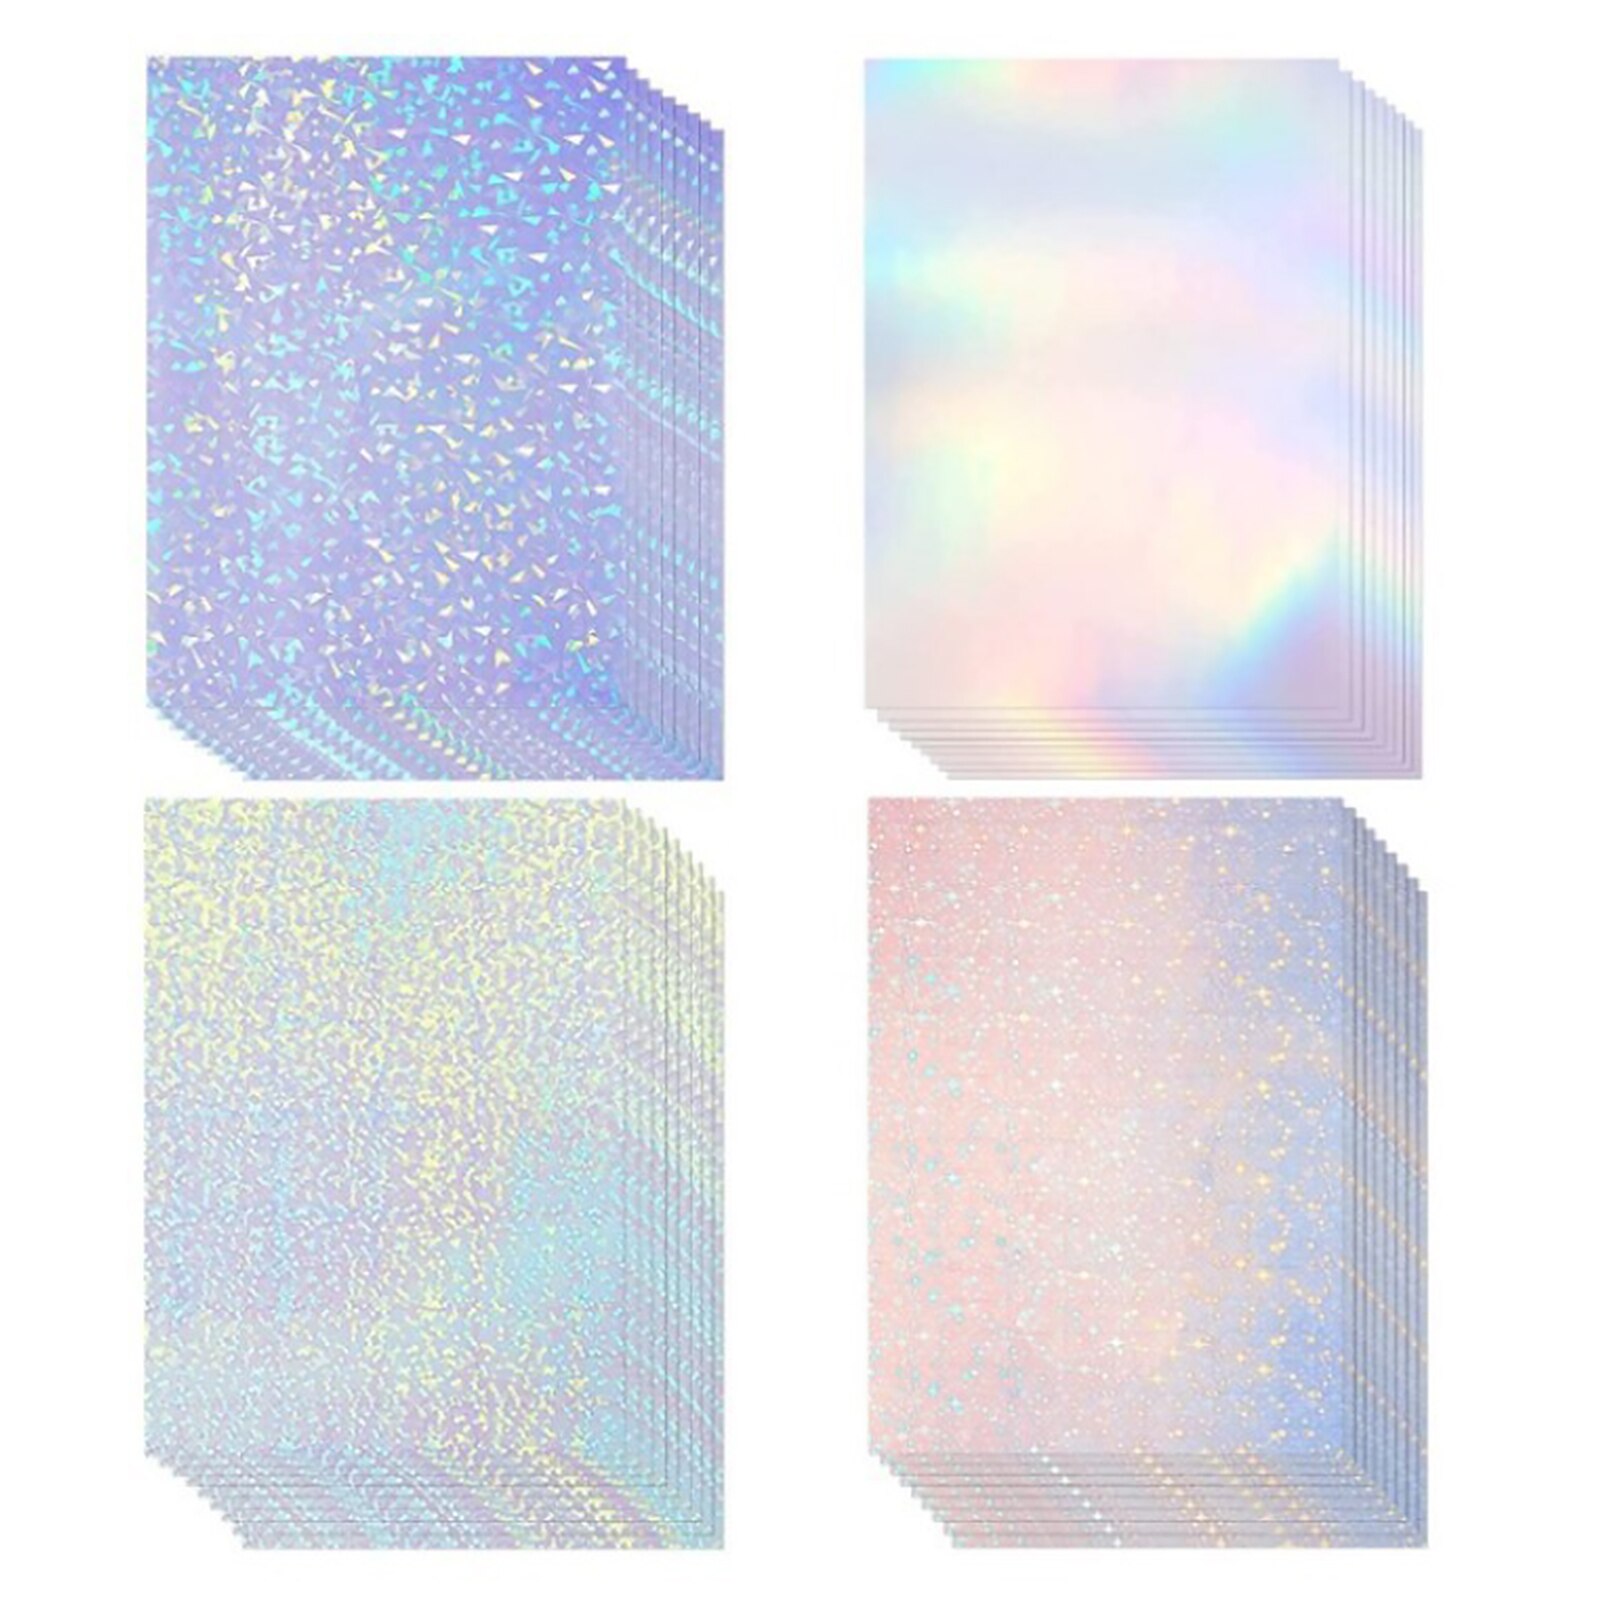 36pcs Self Adhesive Holographic Glossy Printable Sticker Paper Label Waterproof A4 Size DIY Rainbow Quick Dry Smooth Home Office 3